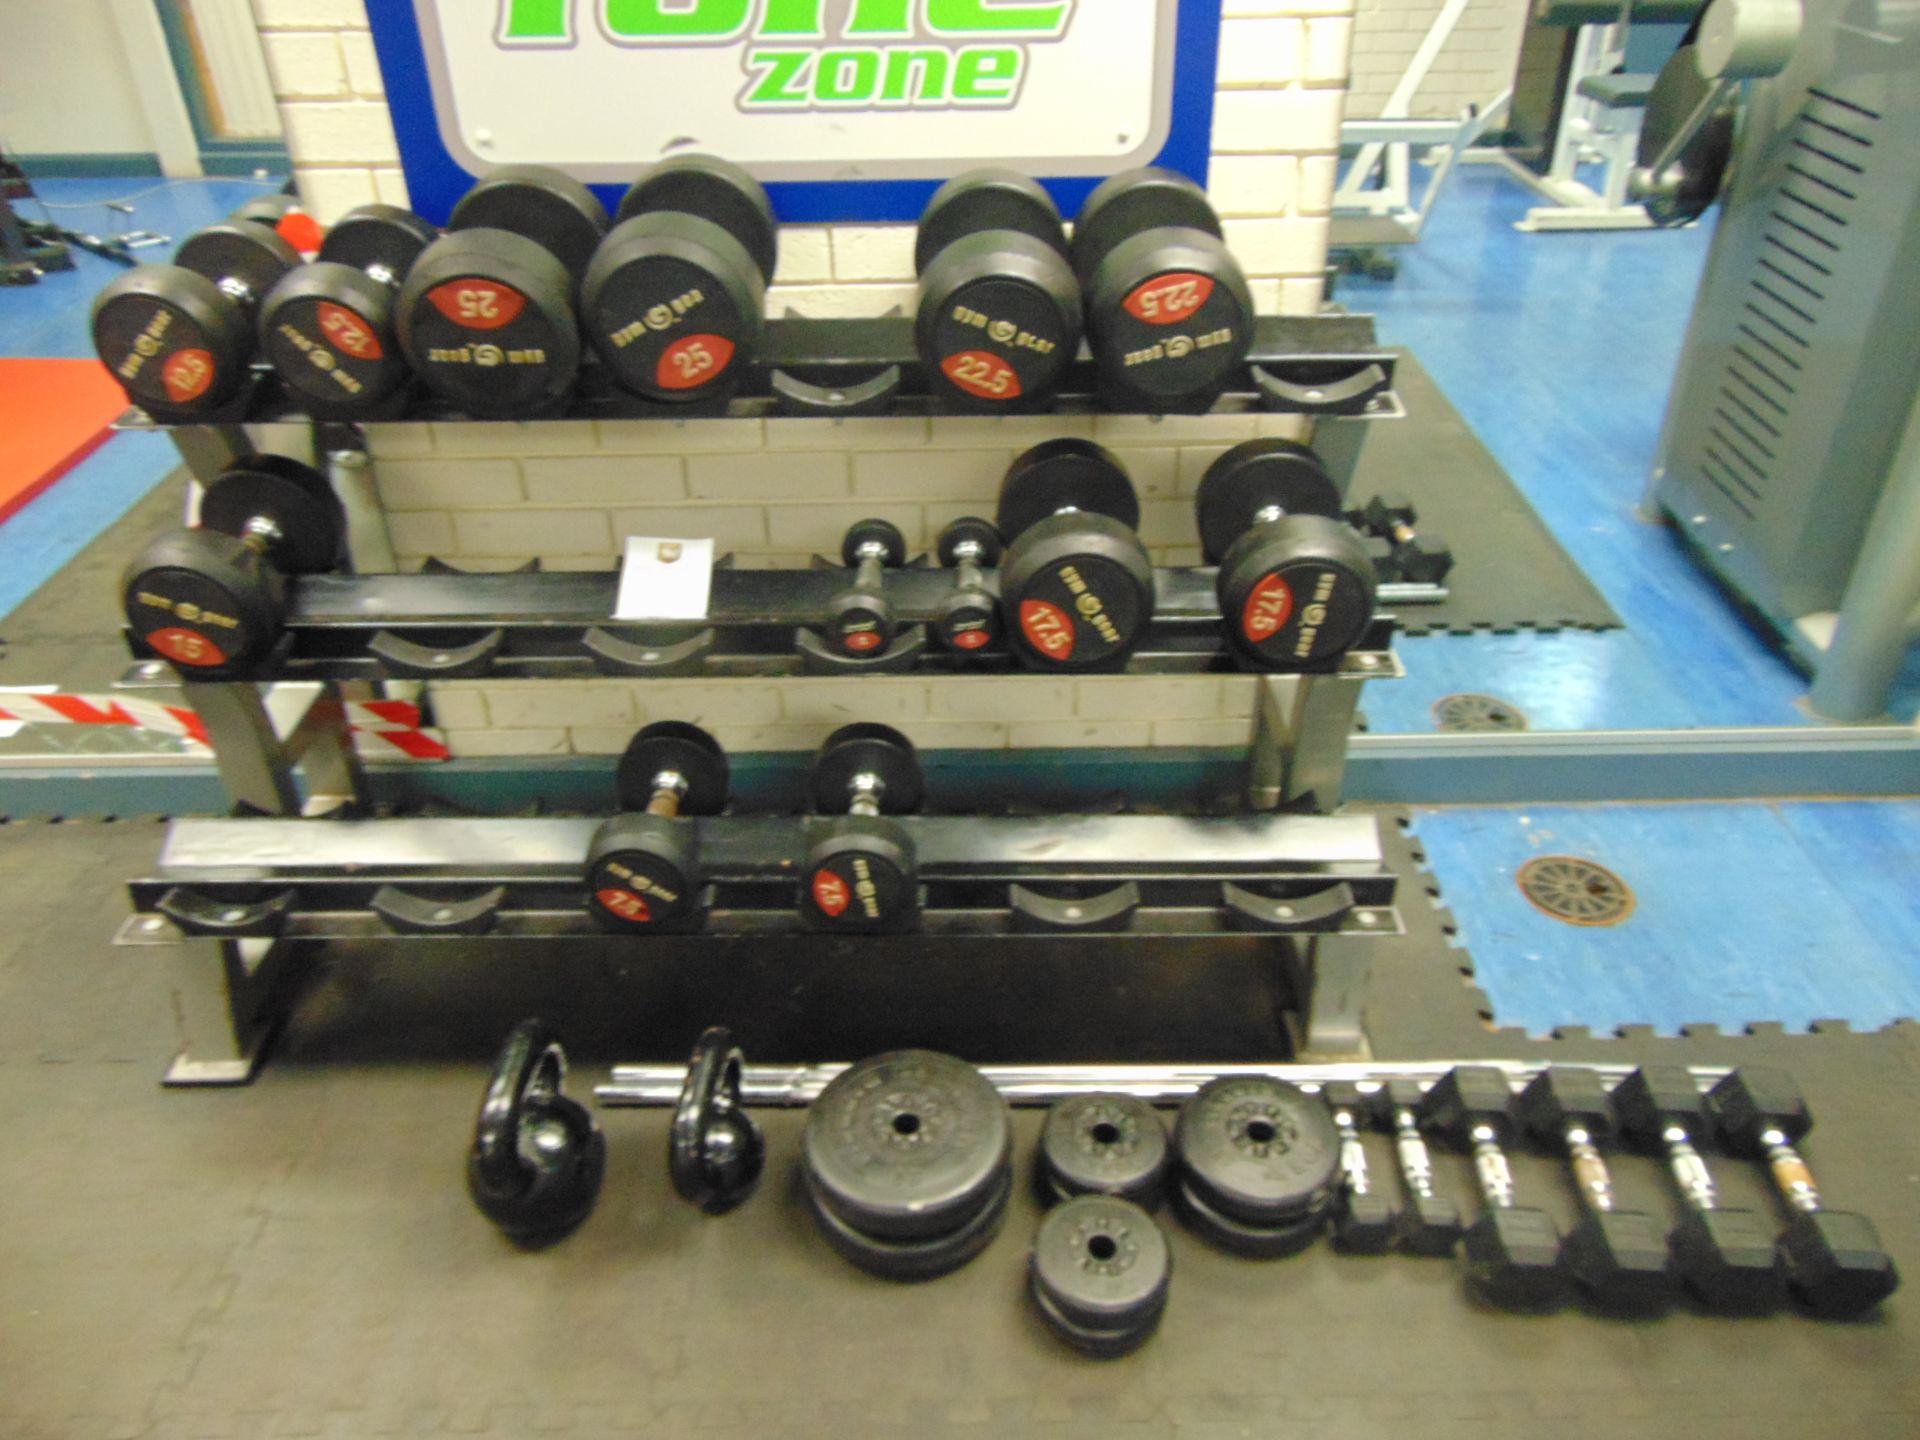 Gym Gear Dumb Bell Station Weights From 2kg to 25kg